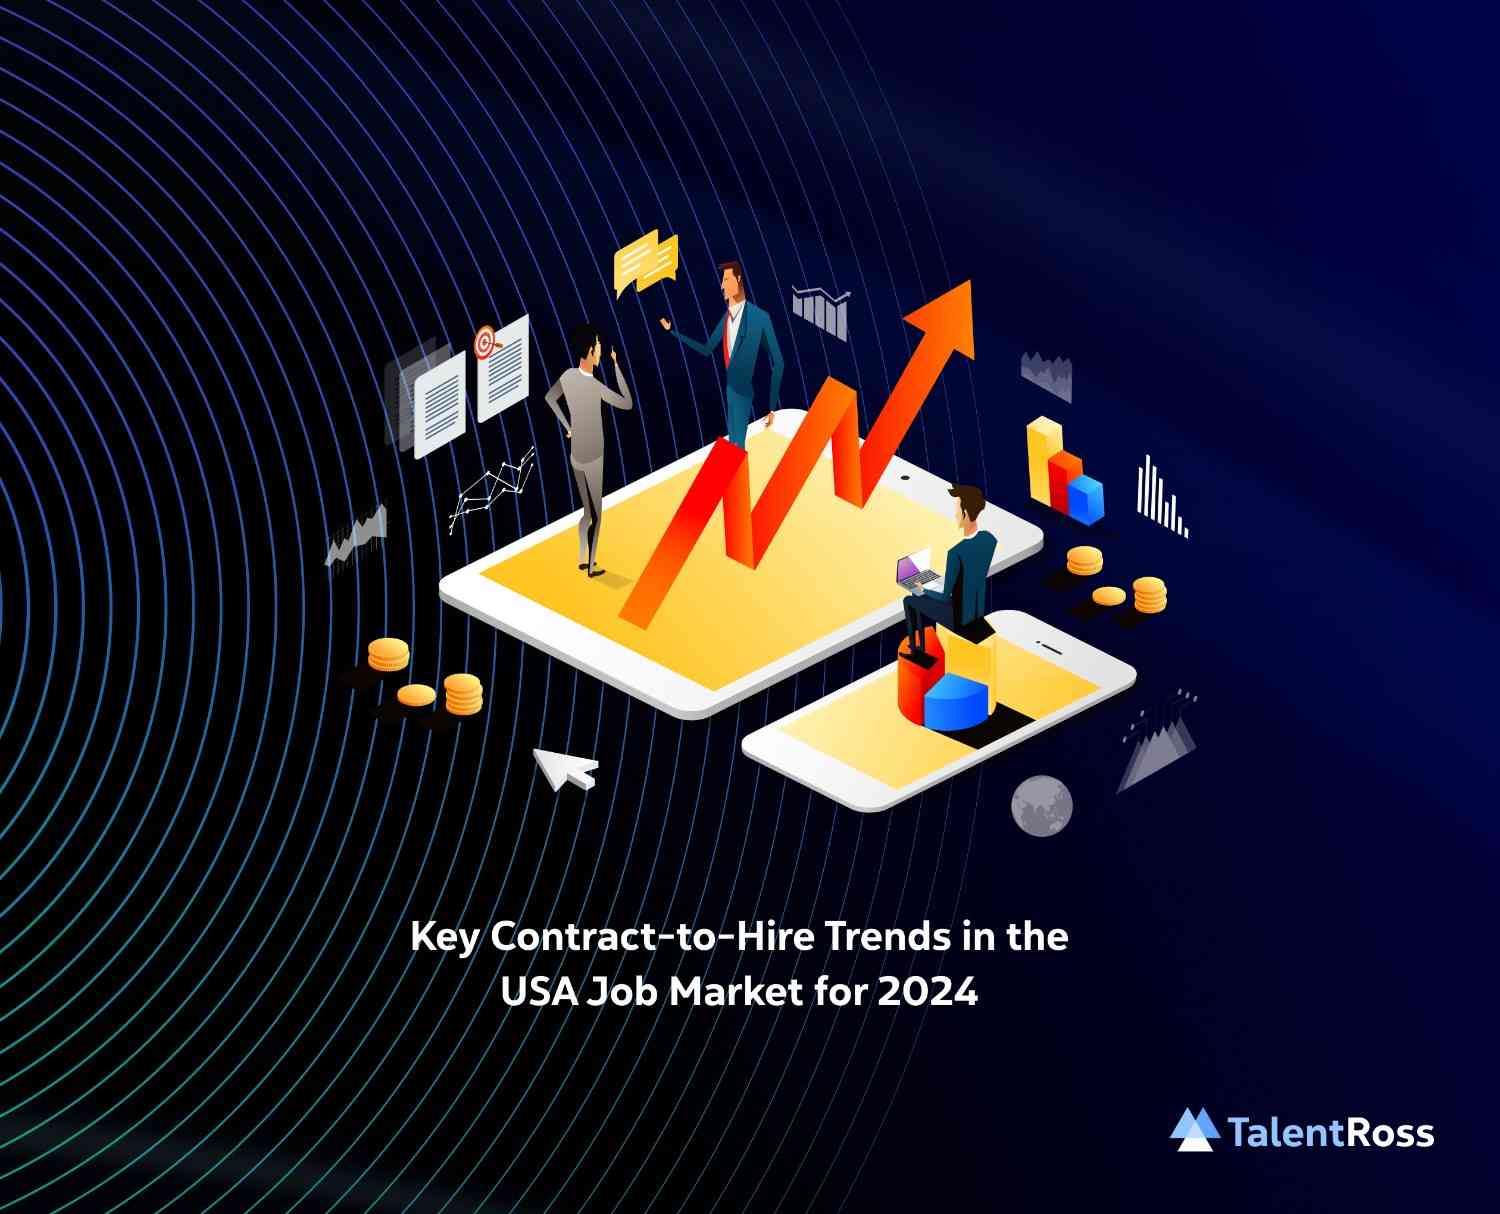 Key Contract-to-Hire Trends in the USA Job Market for 2024